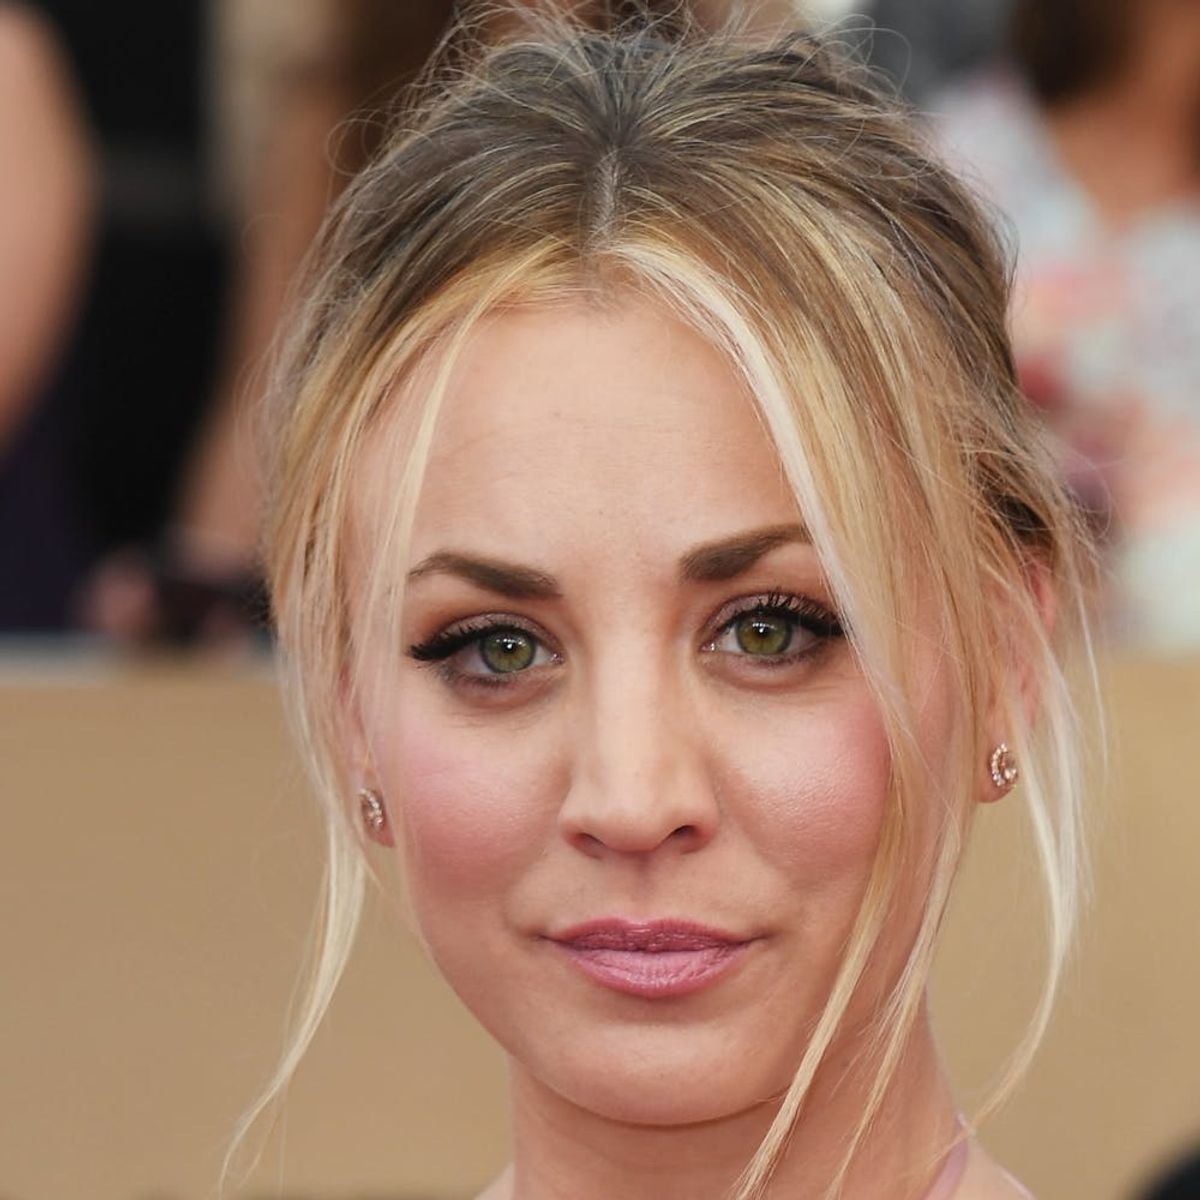 Kaley Cuoco Got in Trouble With the TSA for a Funny Reason